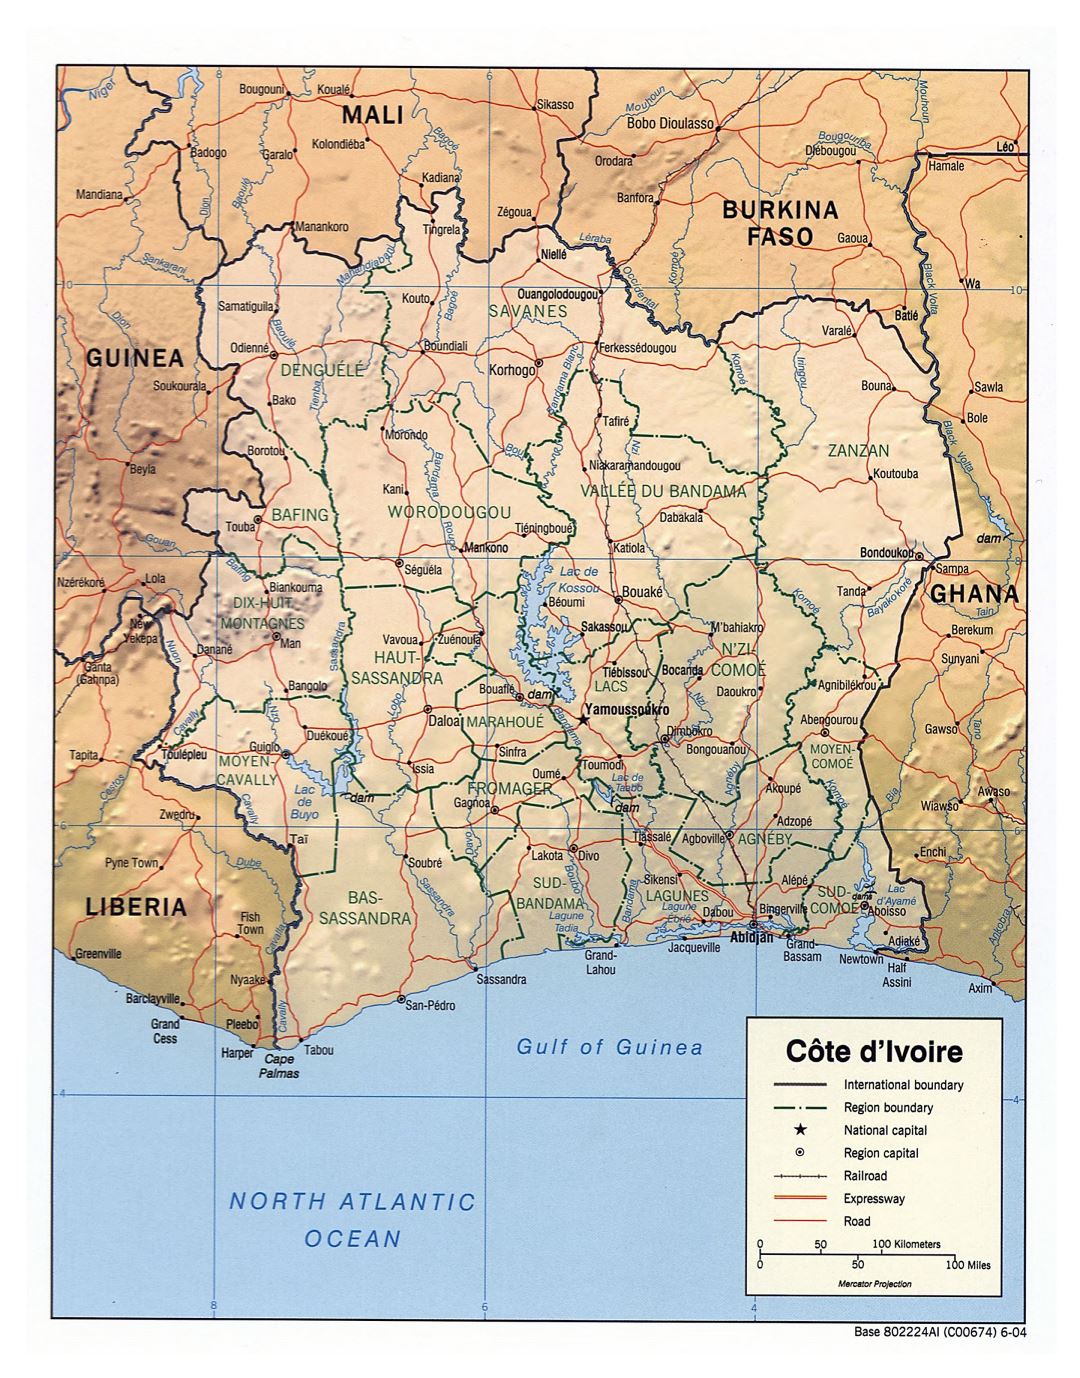 Large scale political and administrative map of Cote d'Ivoire with relief, roads, railroads and major cities - 2004